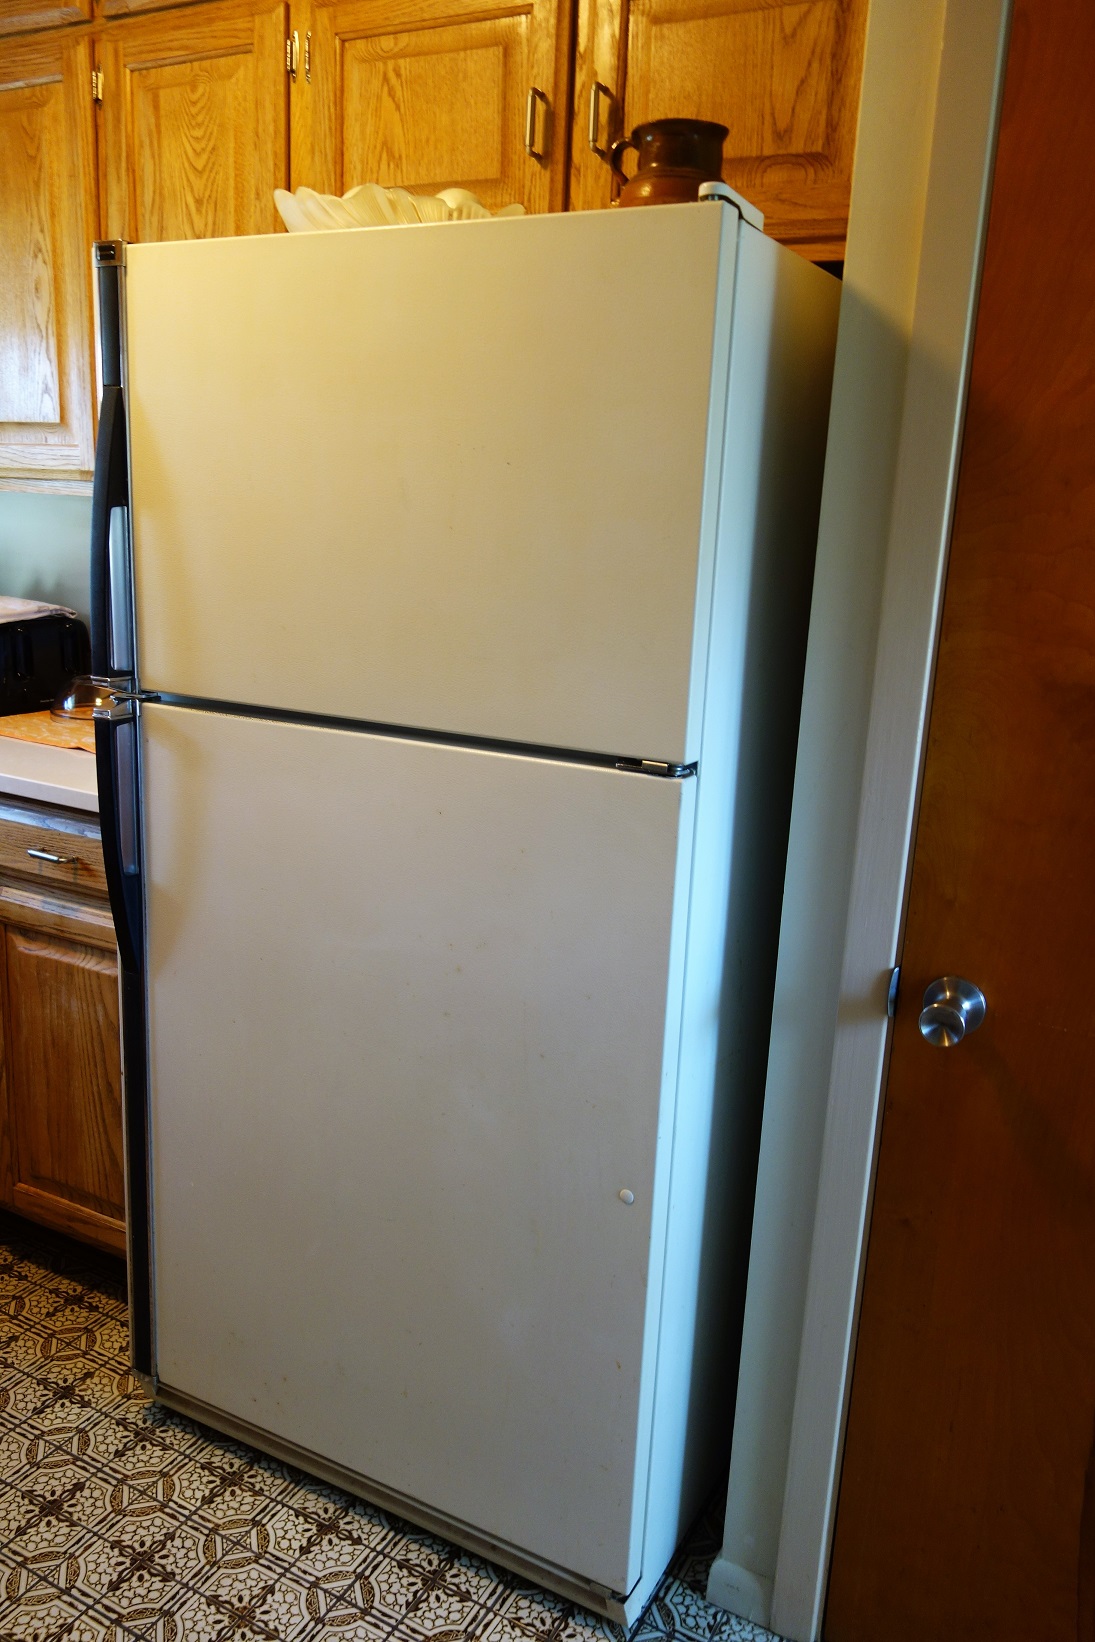 Travels of a Retired Teacher: The Tale of the Fridge